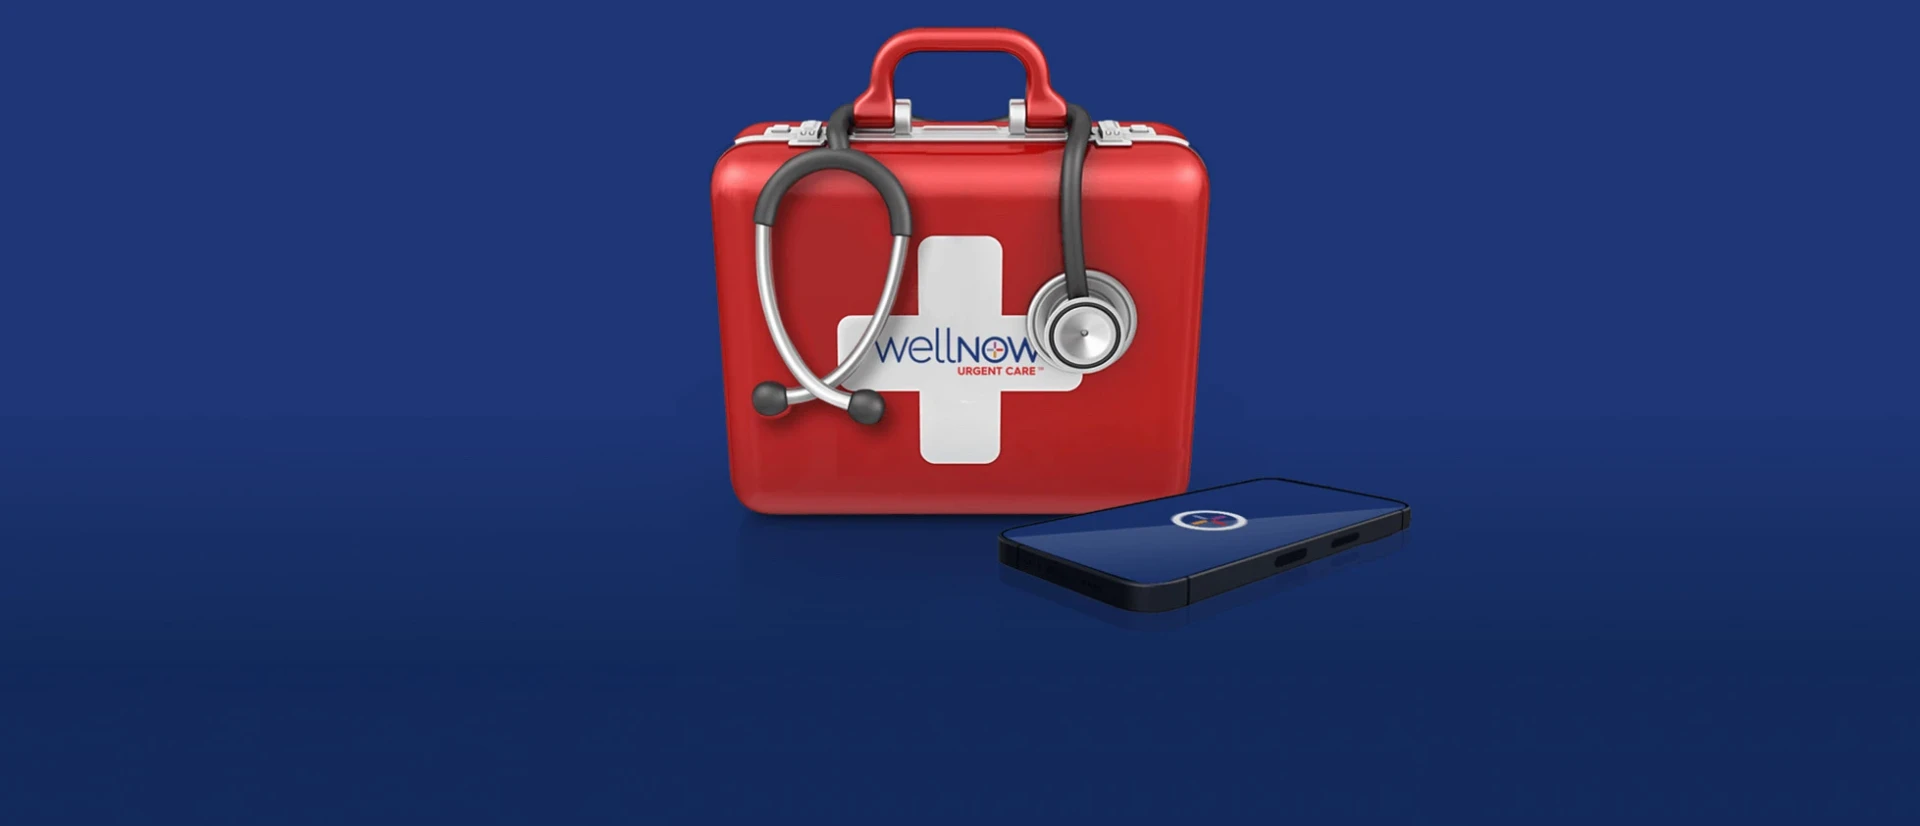 A smart phone, a stethoscope, and a red first aid kit emblazoned with the WellNow Urgent Care logo, are arranged against a blue background.